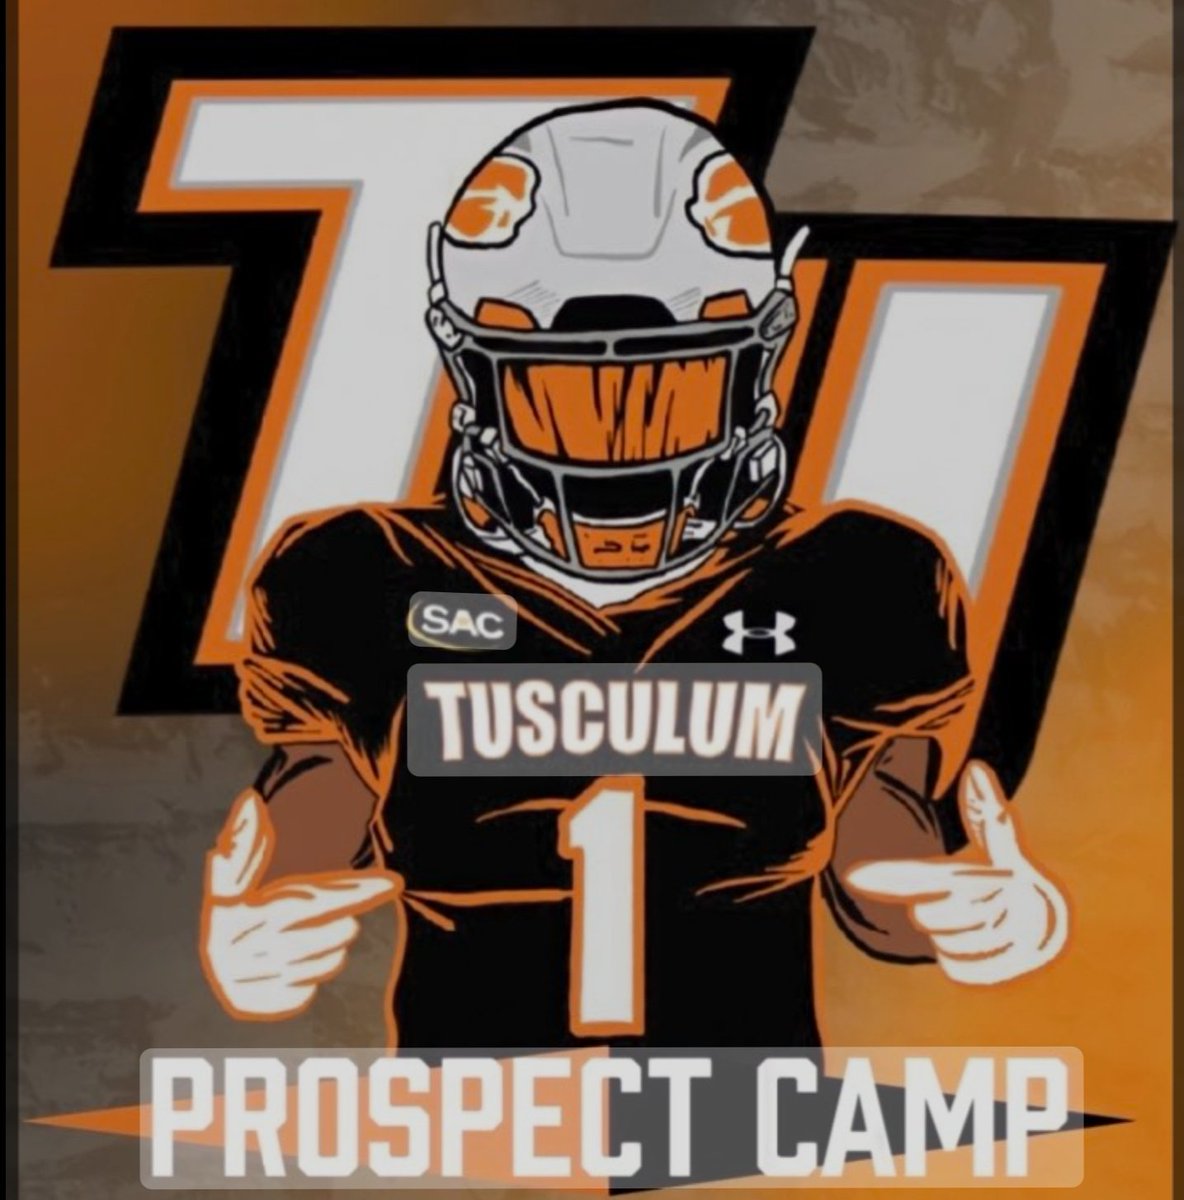 I would like to thank @TusculumFB @Tusculum_Univ @TusculumSports for the prospect camp invite, it's a great opportunity.